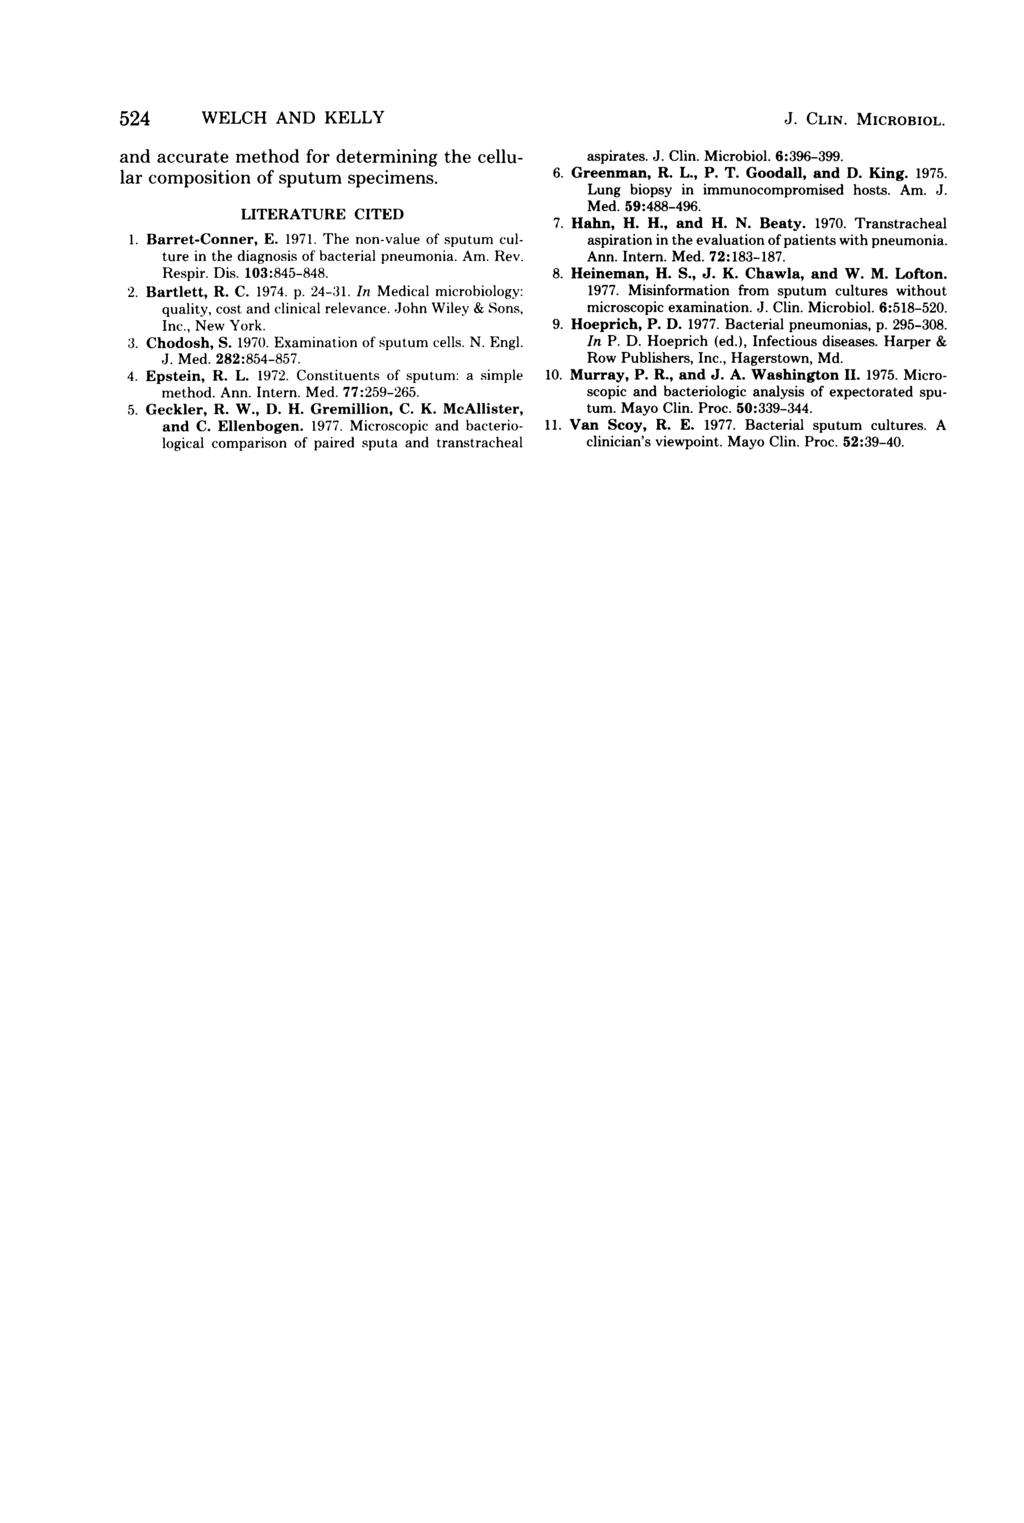 524 WELCH AND KELLY and accurate method for determining the cellular composition of sputum specimens. LITERATURE CITED 1. Barret-Conner, E. 1971.